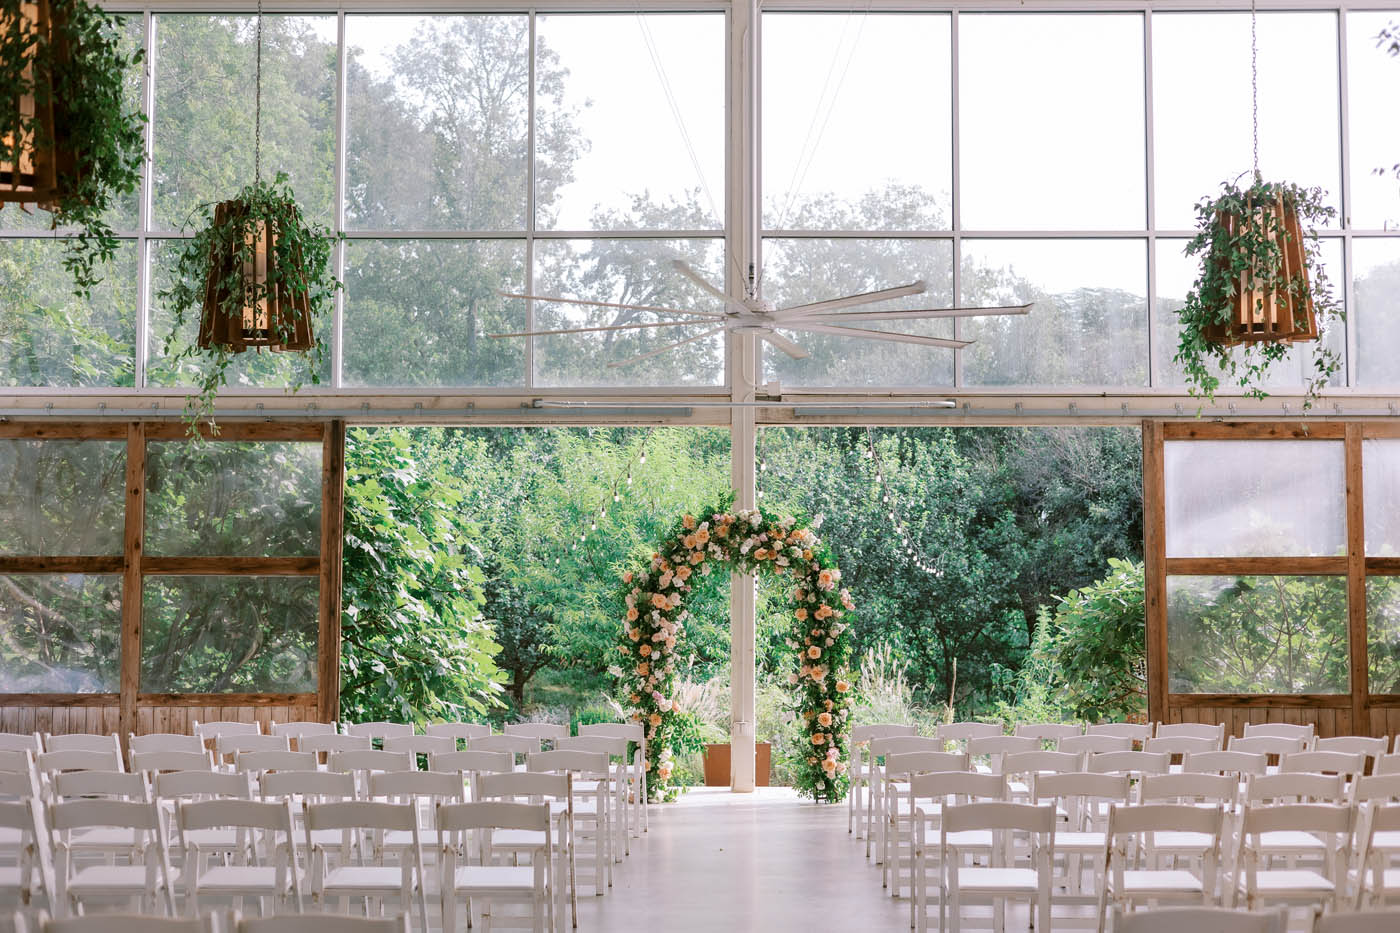 barr mansion ceremony setup with floral arch